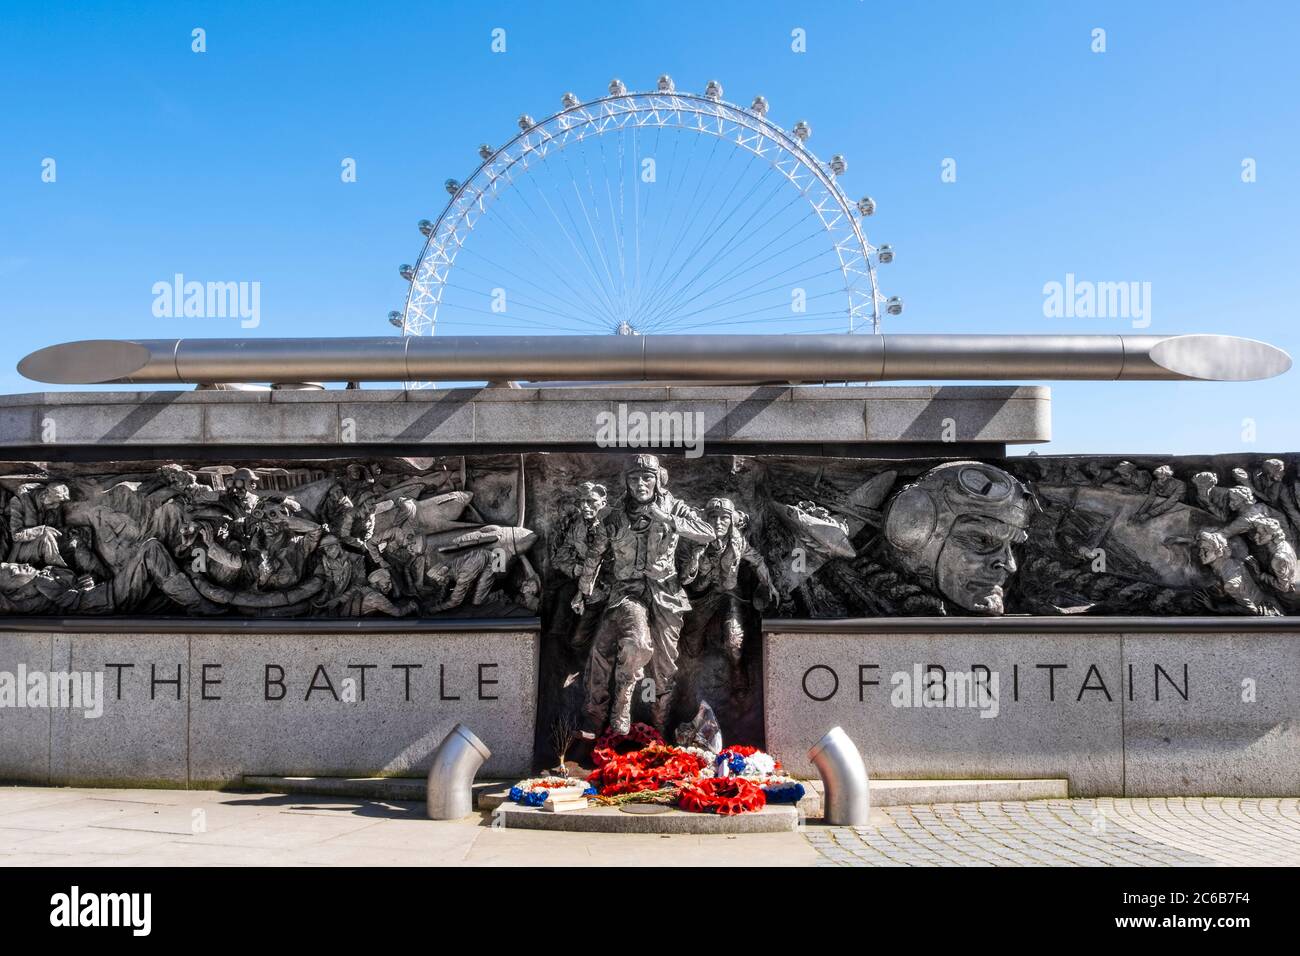 The RAF Battle of Britain Memorial Monument by British sculptor Paul Day, with the London Eye behind, London, England, United Kingdom, Europe Stock Photo